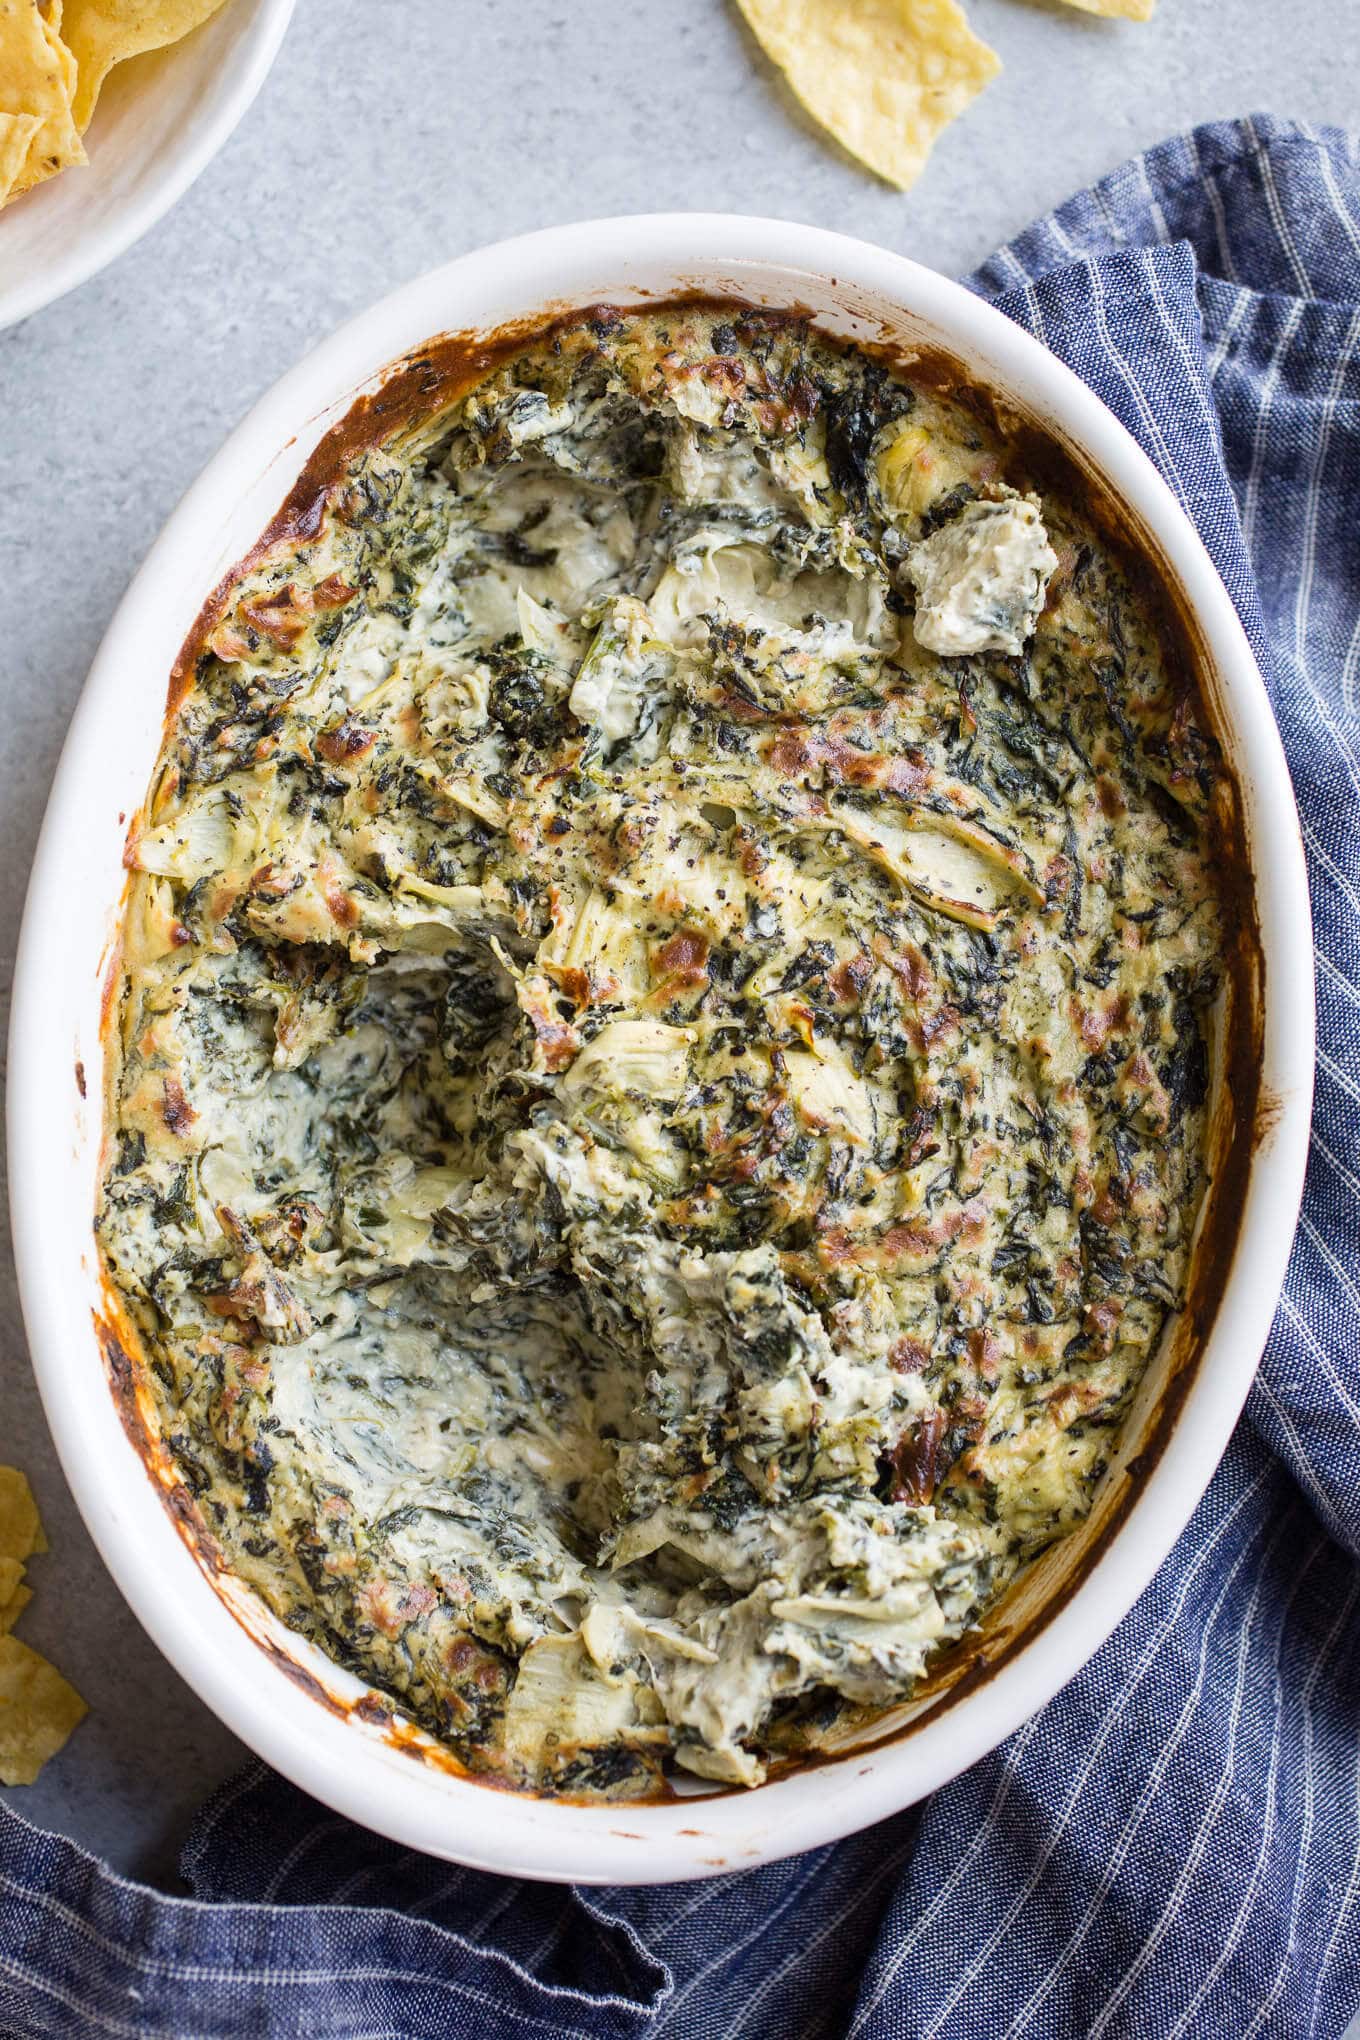 Baked Vegan Spinach Artichoke Dip is made dairy-free with a cashew cream base. An easy appetizer dip recipe for a crowd. 